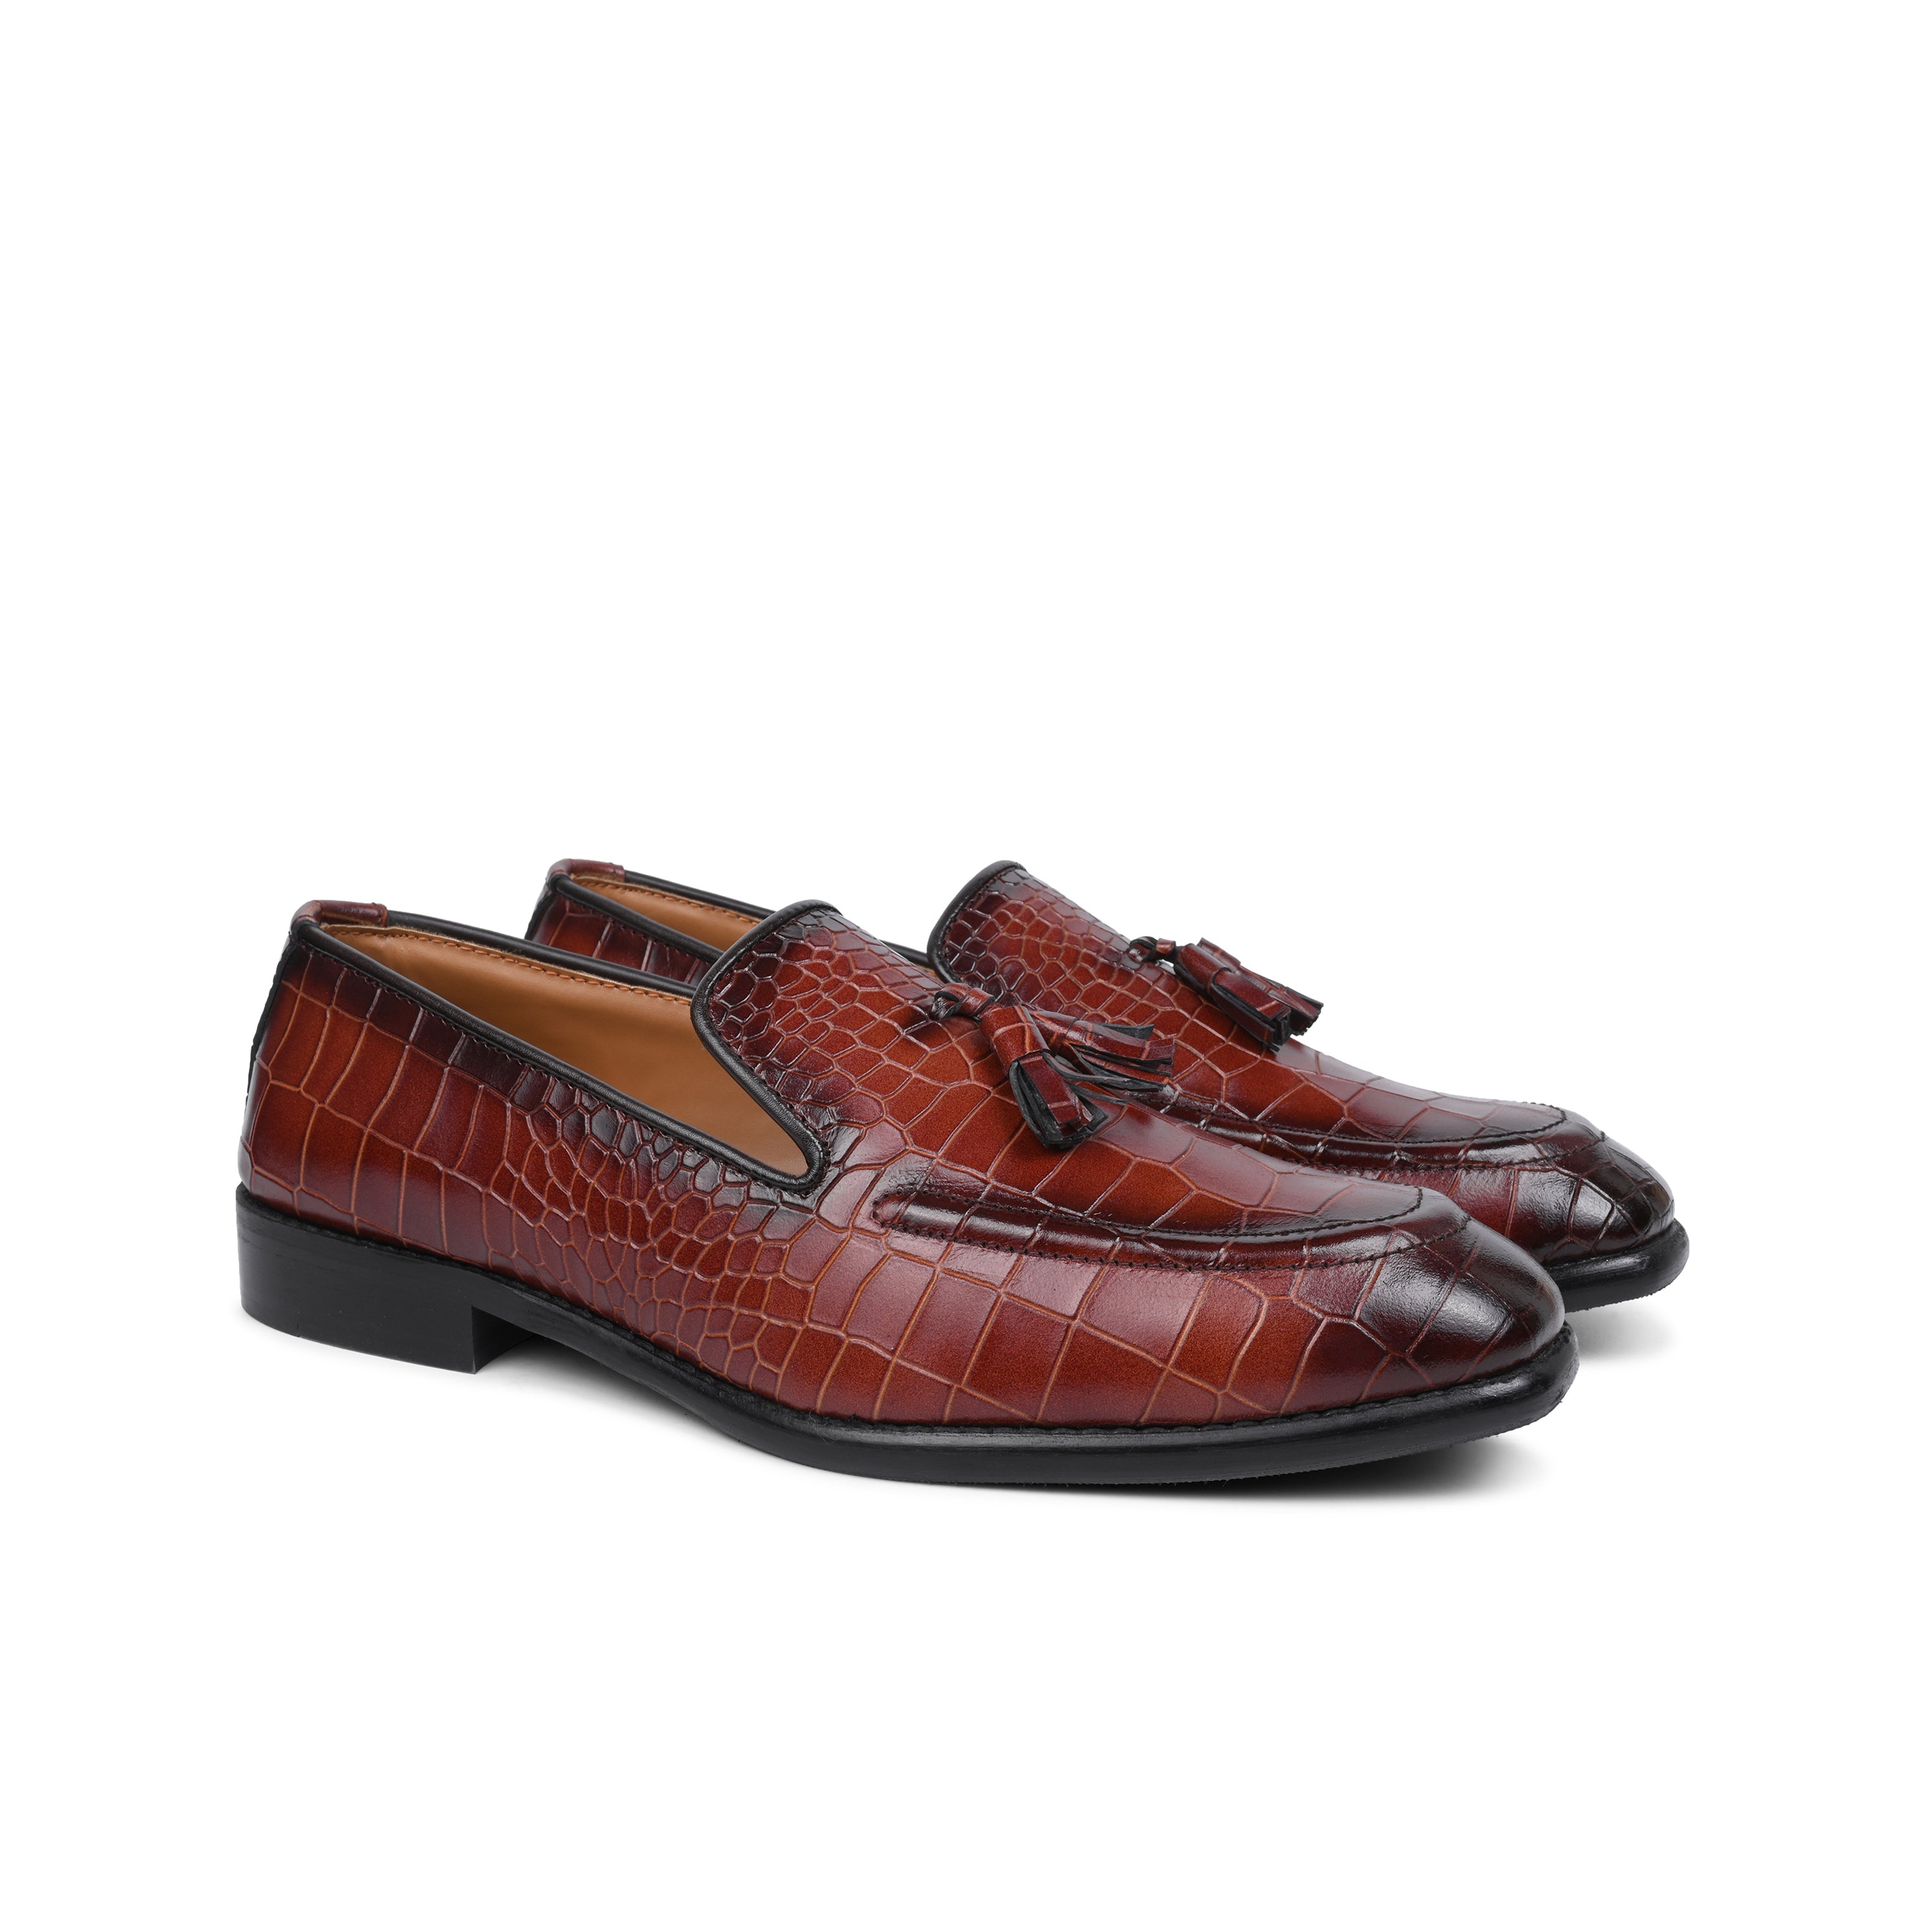 Otha Murillo Loafers